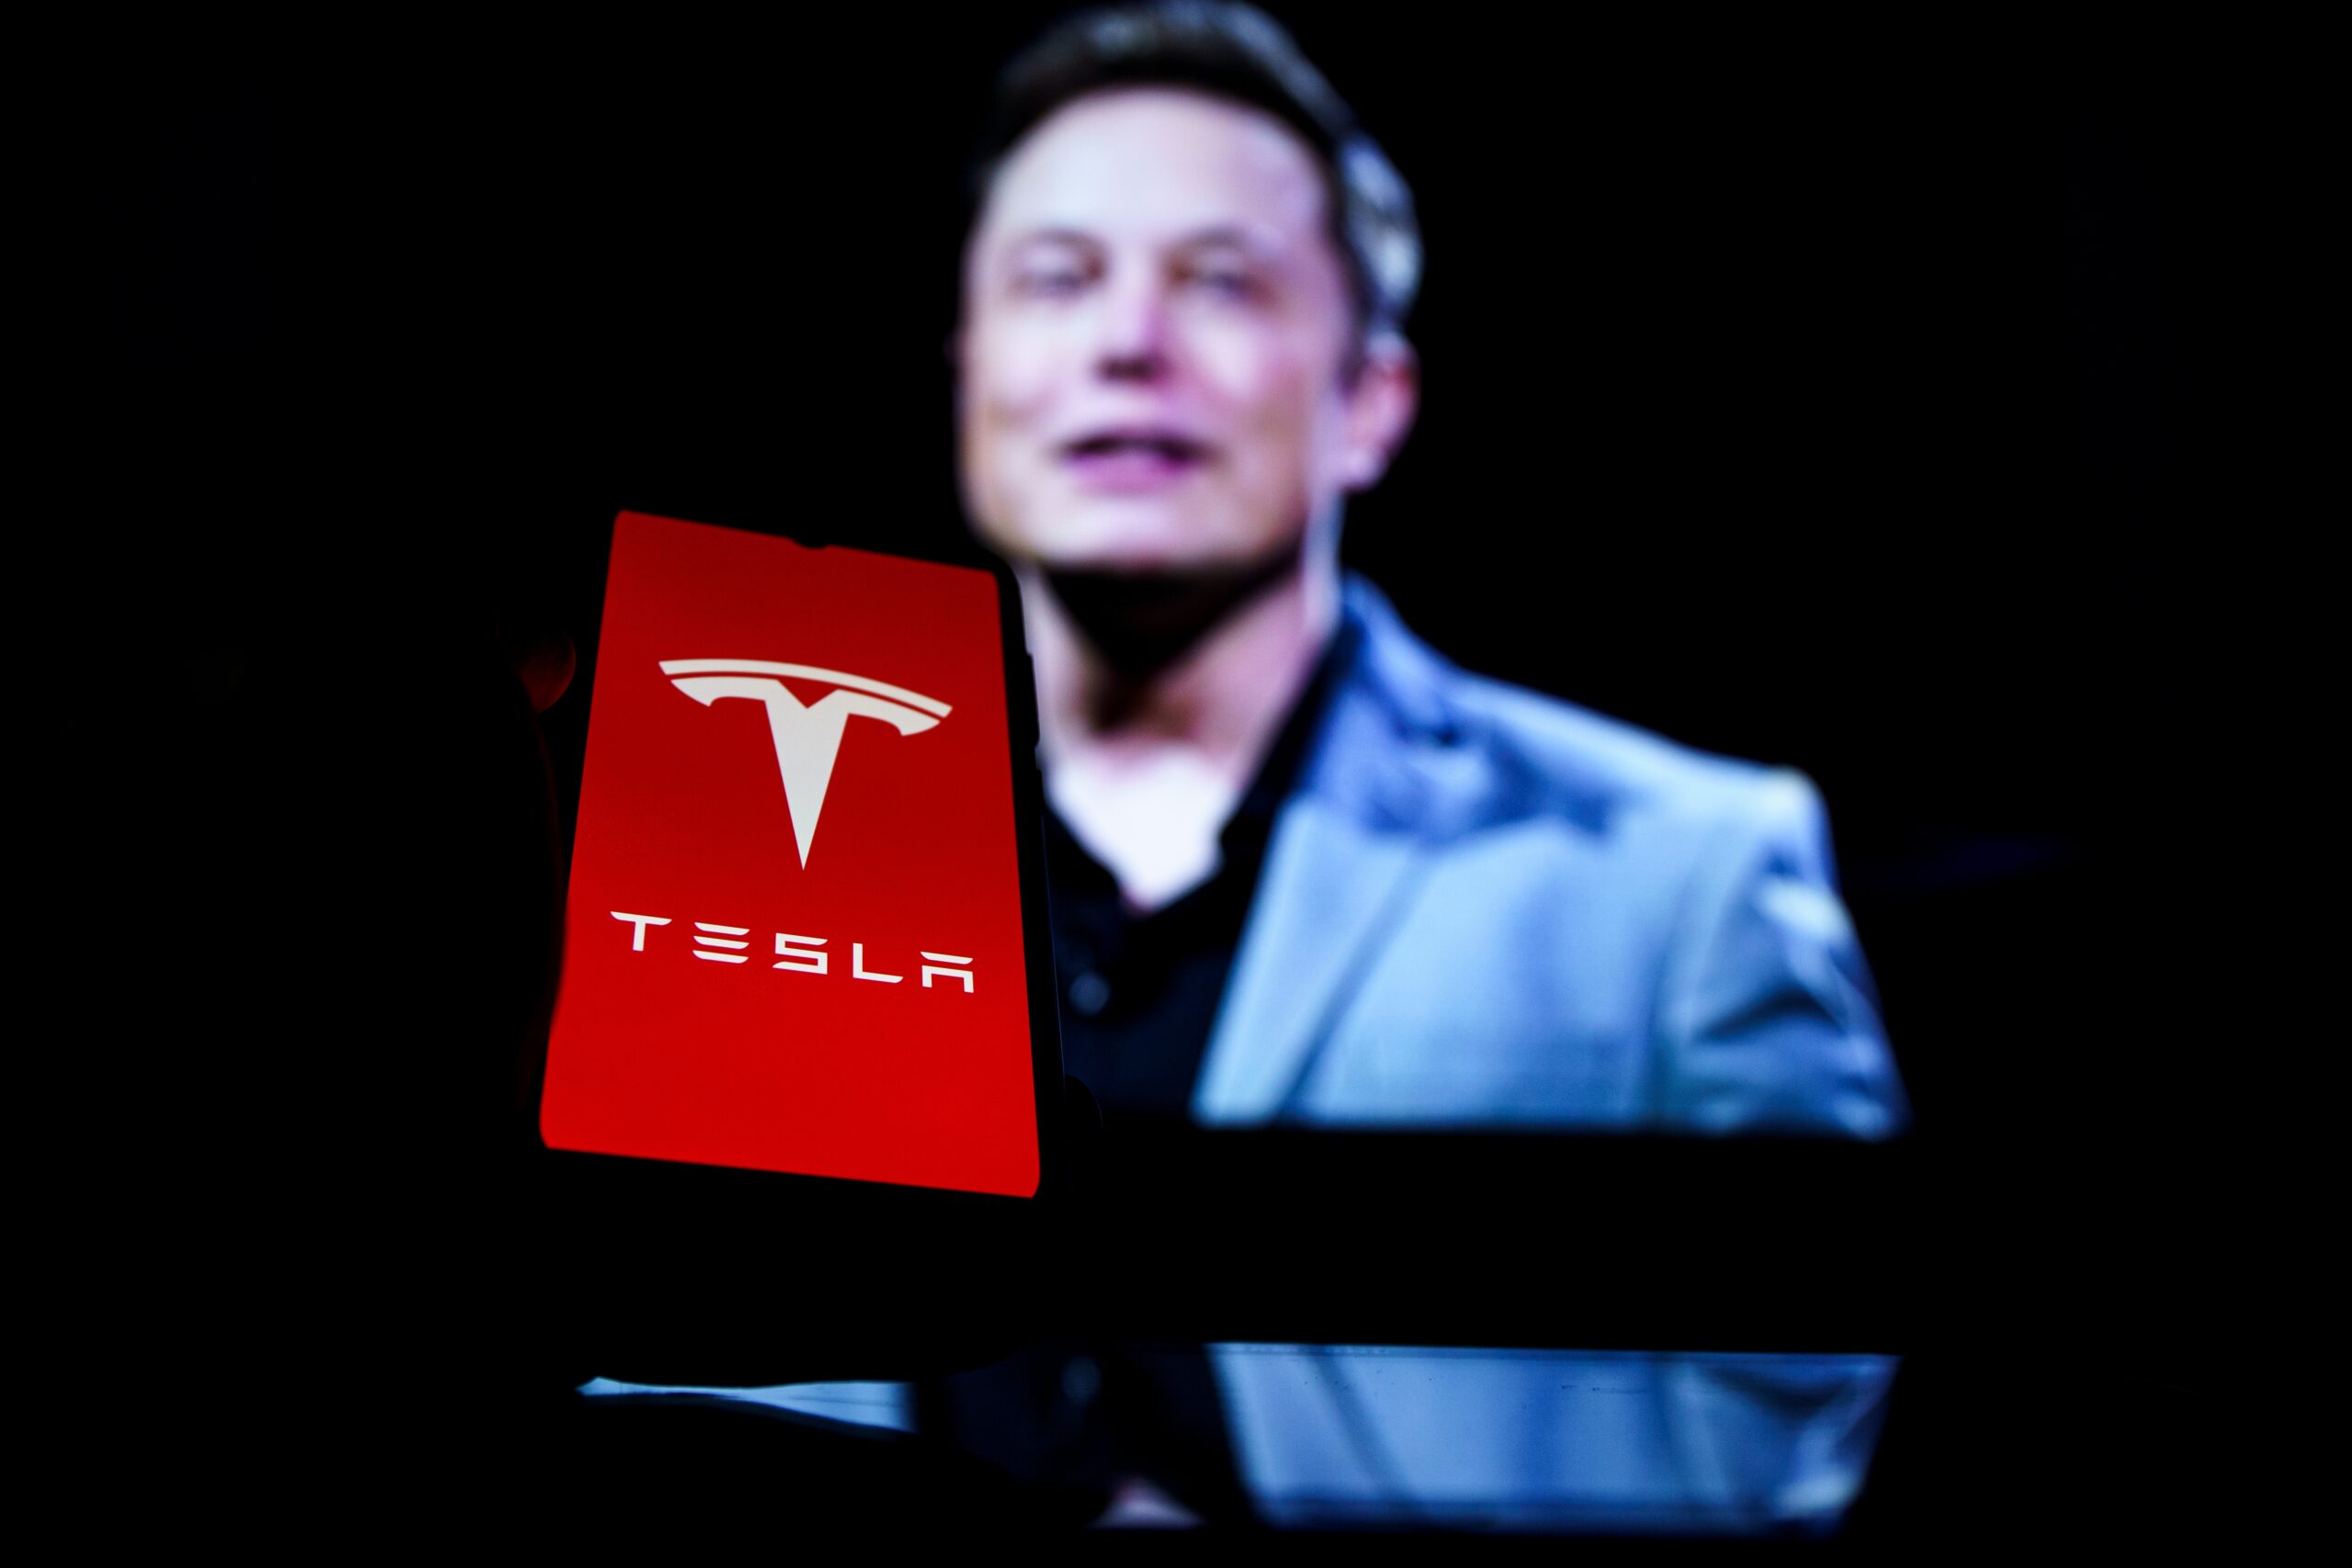 Elon Musk grins behind an electronic device that says "Tesla"